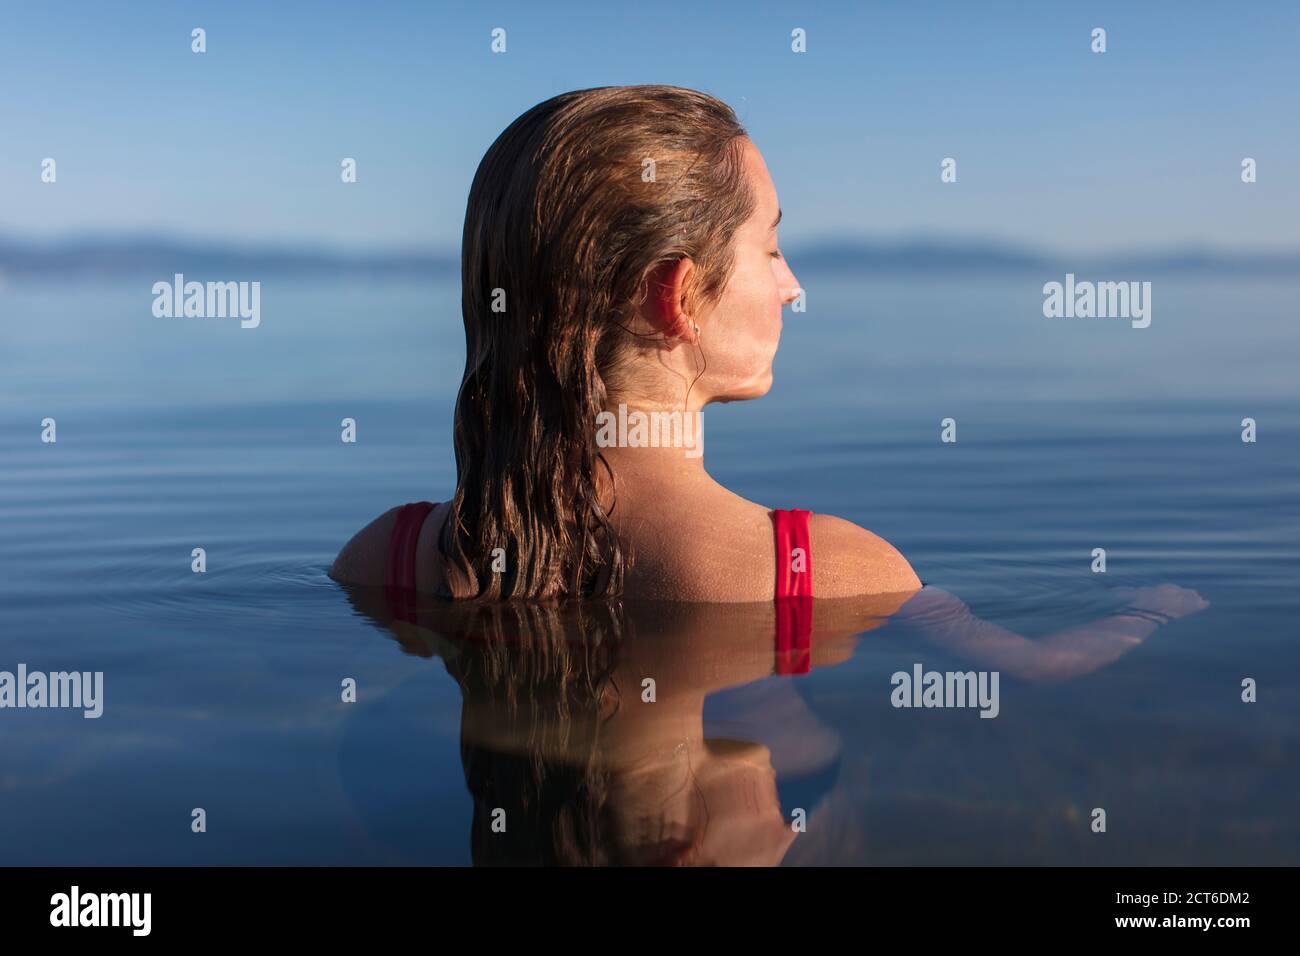 Teenage girl swimming in a lake, head and shoulders above calm lake water at dawn, eyes closed Stock Photo